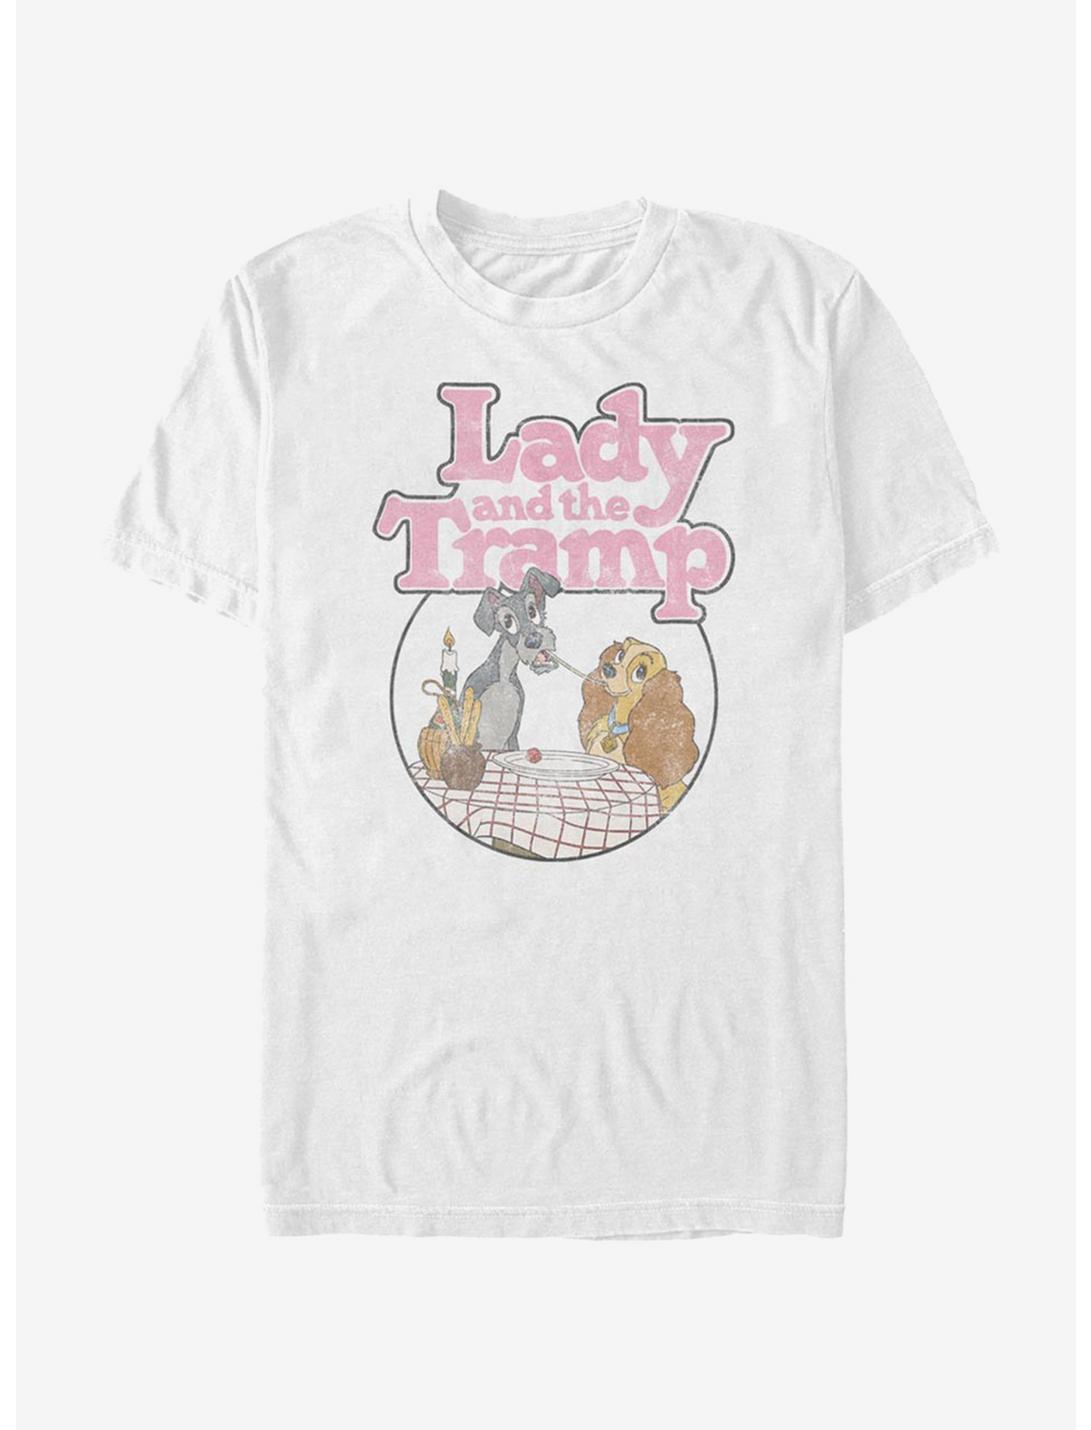 Disney Lady And The Tramp Bella Notte T-Shirt, WHITE, hi-res